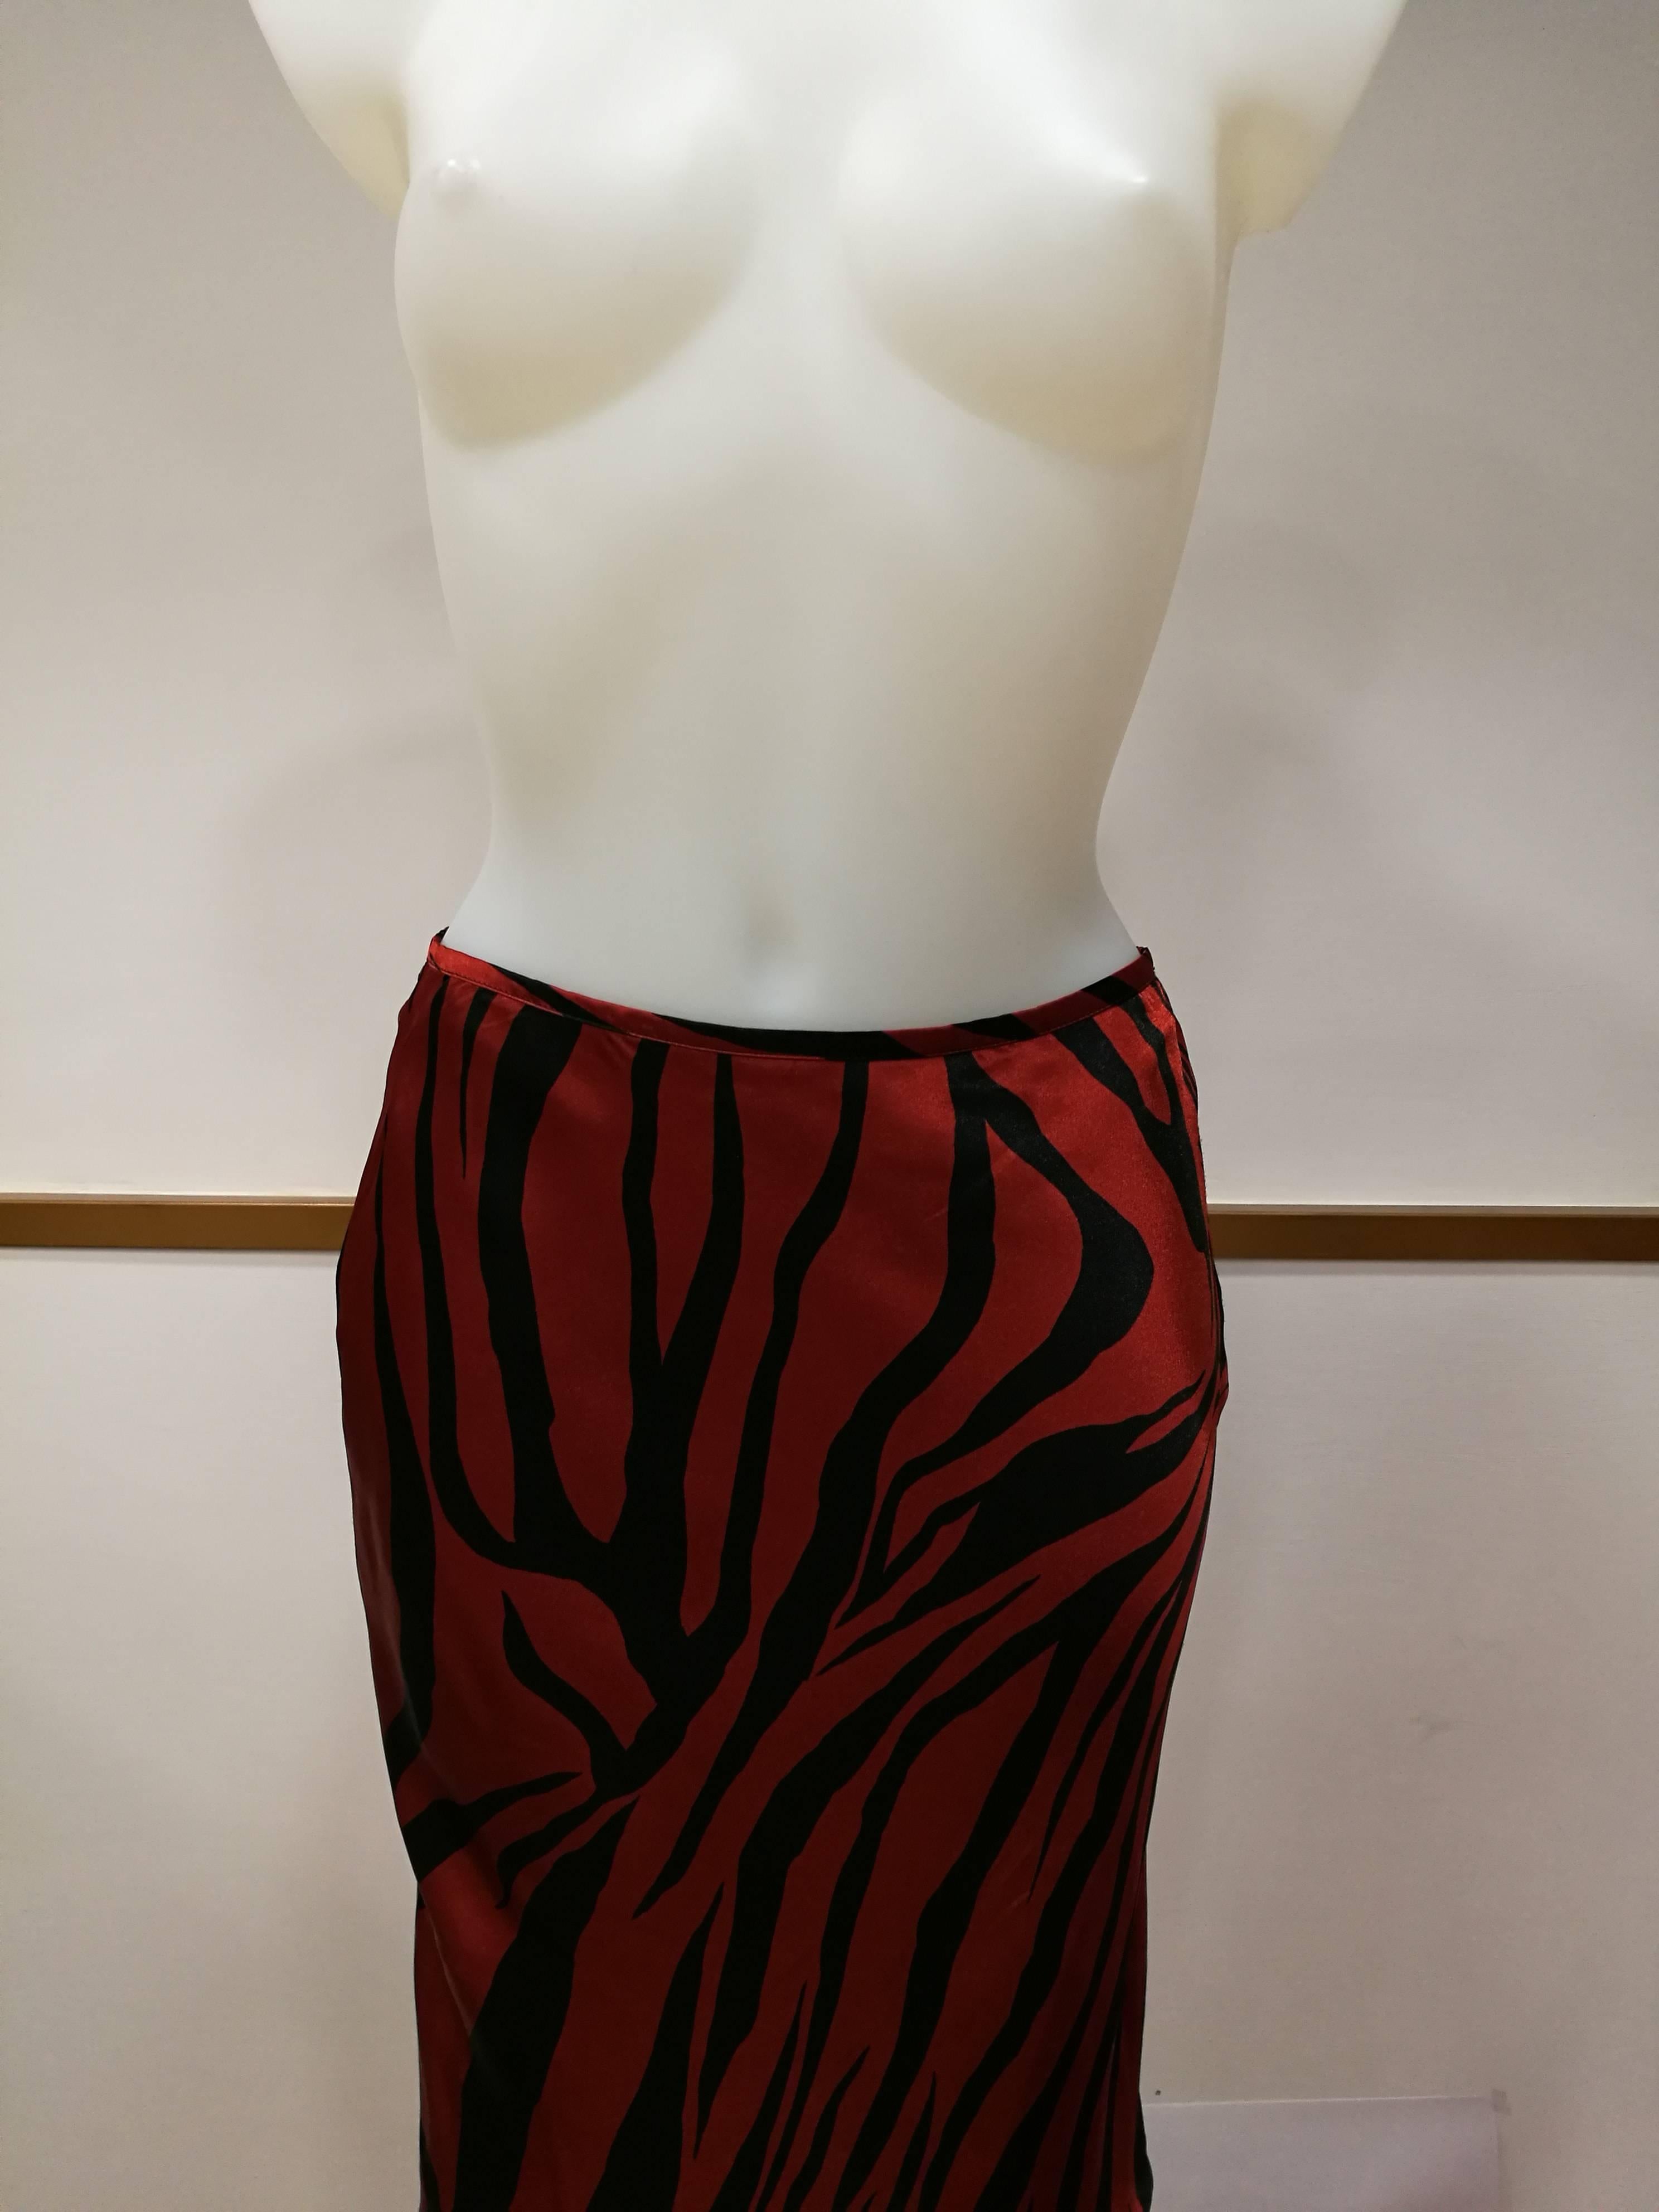 1990s Alexander McQueen Red Black Silk Skirt

Totally made in italy in standard size M 

Composition: 100% Viscose